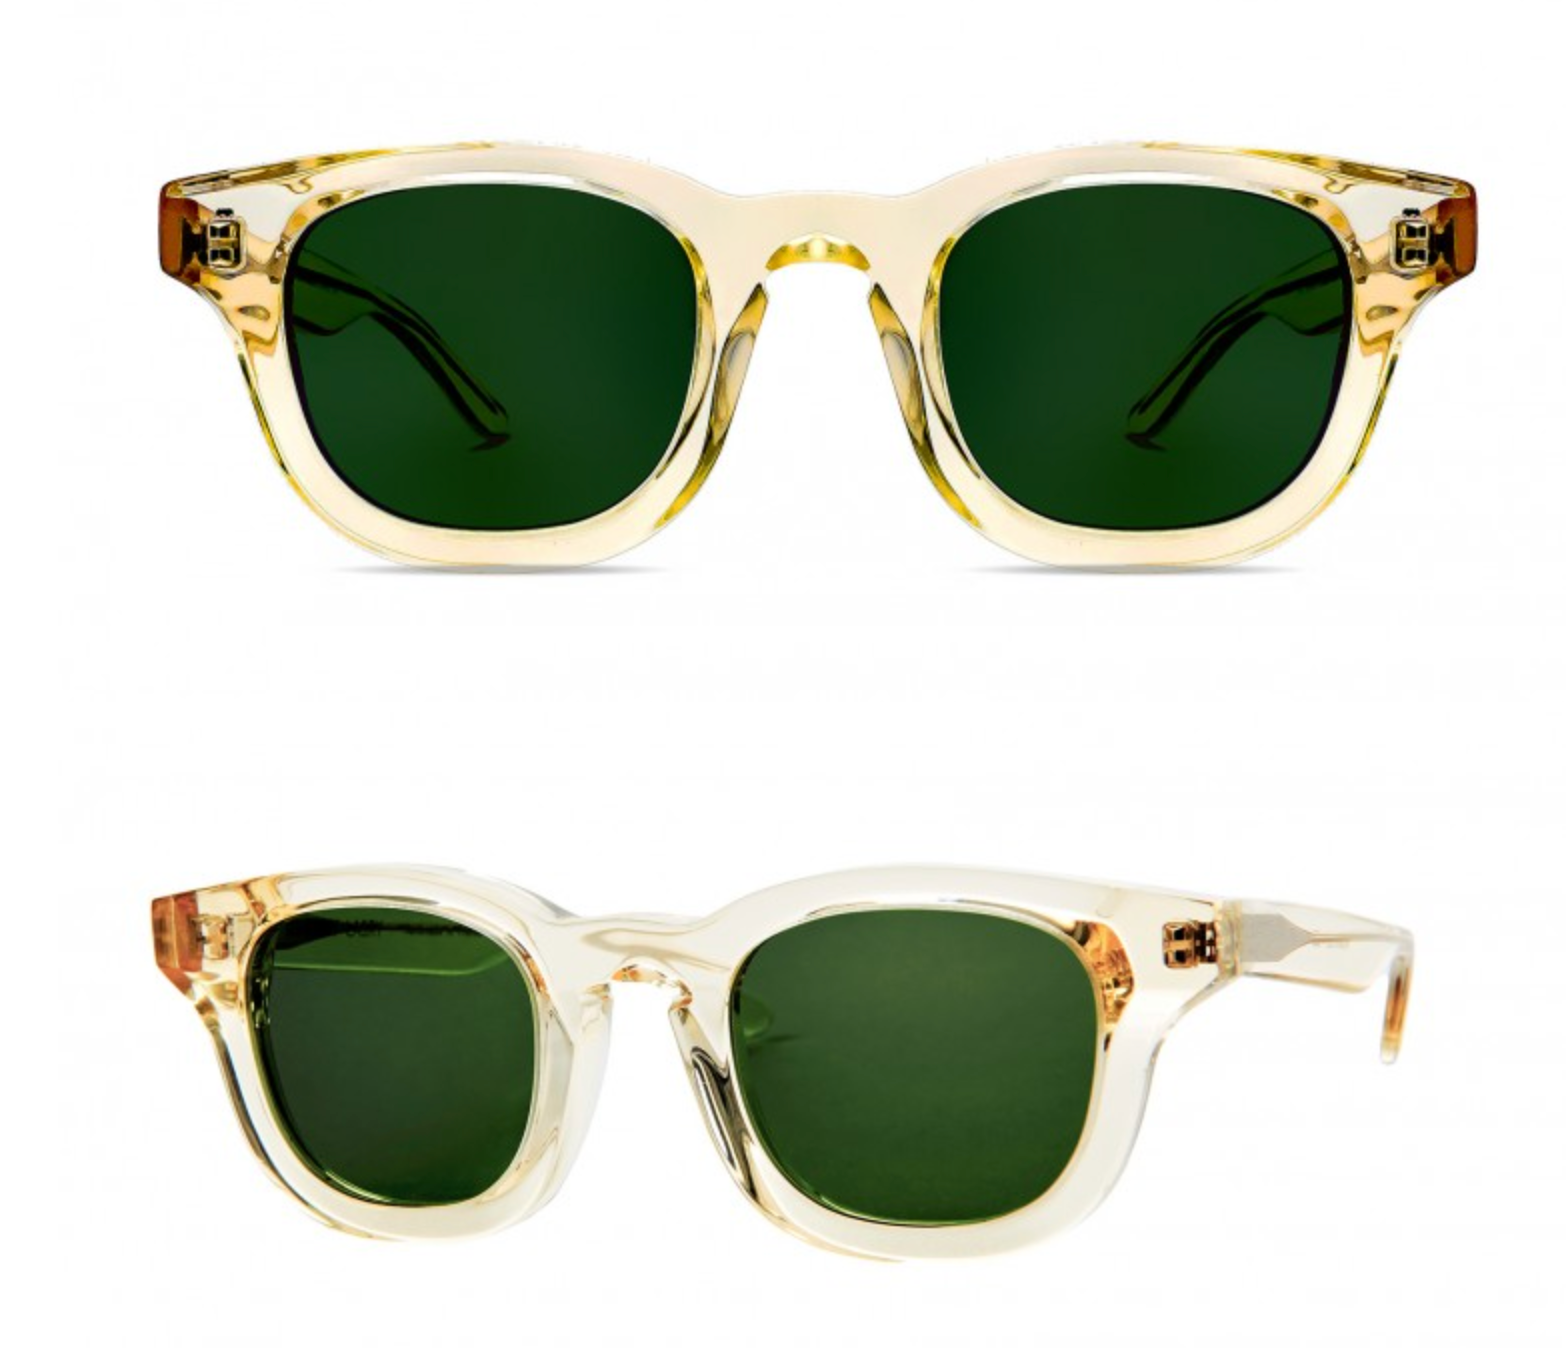 Thierry Lasry - Monopoly